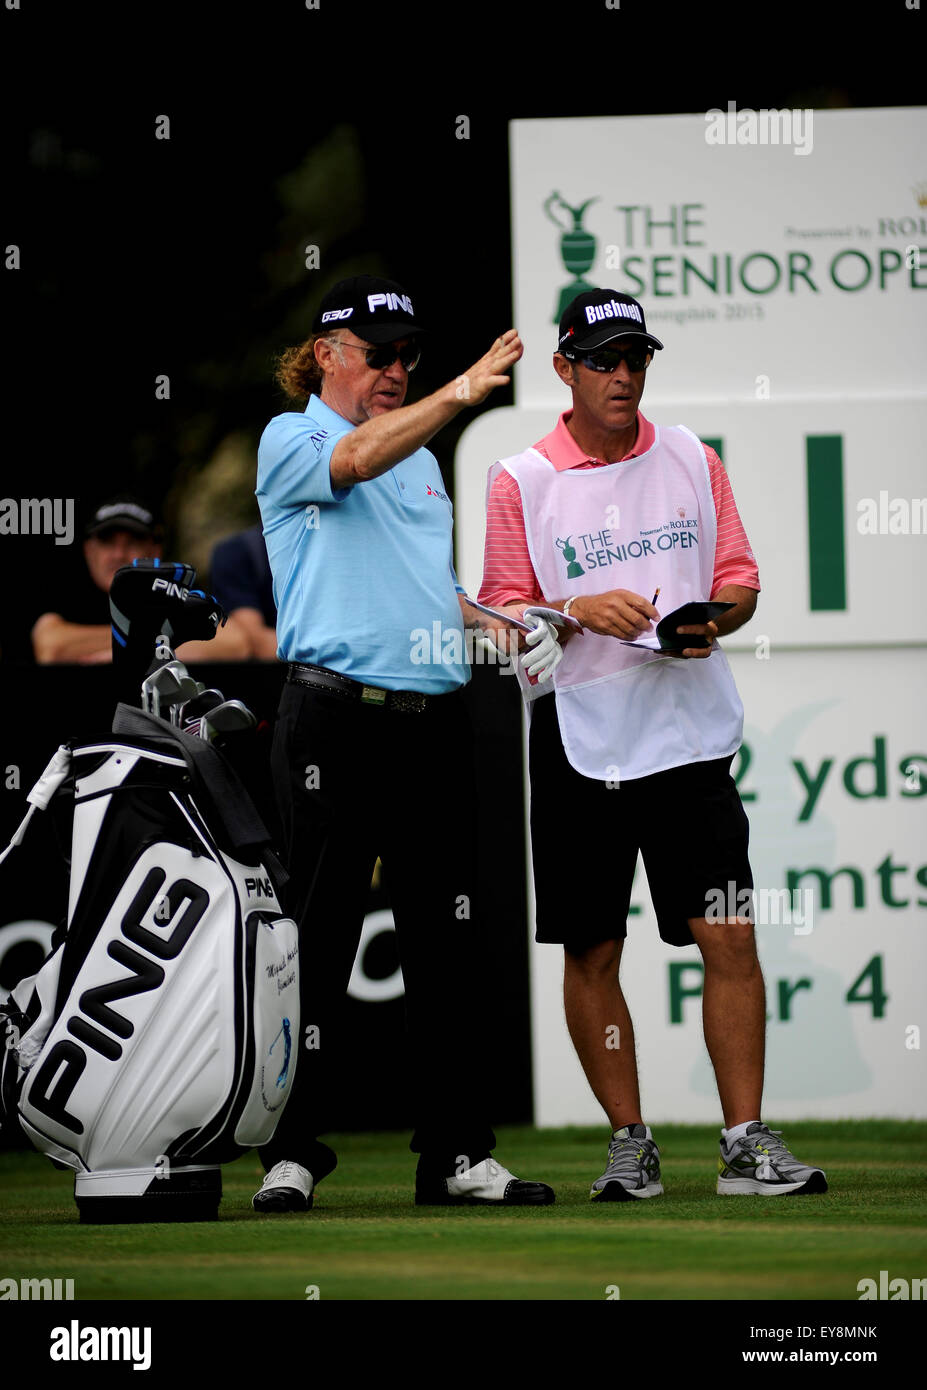 Sunningdale, UK. 23rd July, 2015. Miguel Angel Jimenez of Spain consulting  with his caddy on the 11th hole on his way to an opening 65 (-5) in the  first round of The